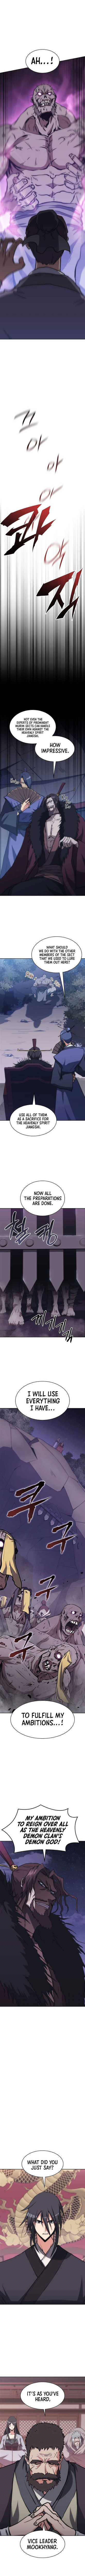 MookHyang - The Origin Chapter 40 page 6